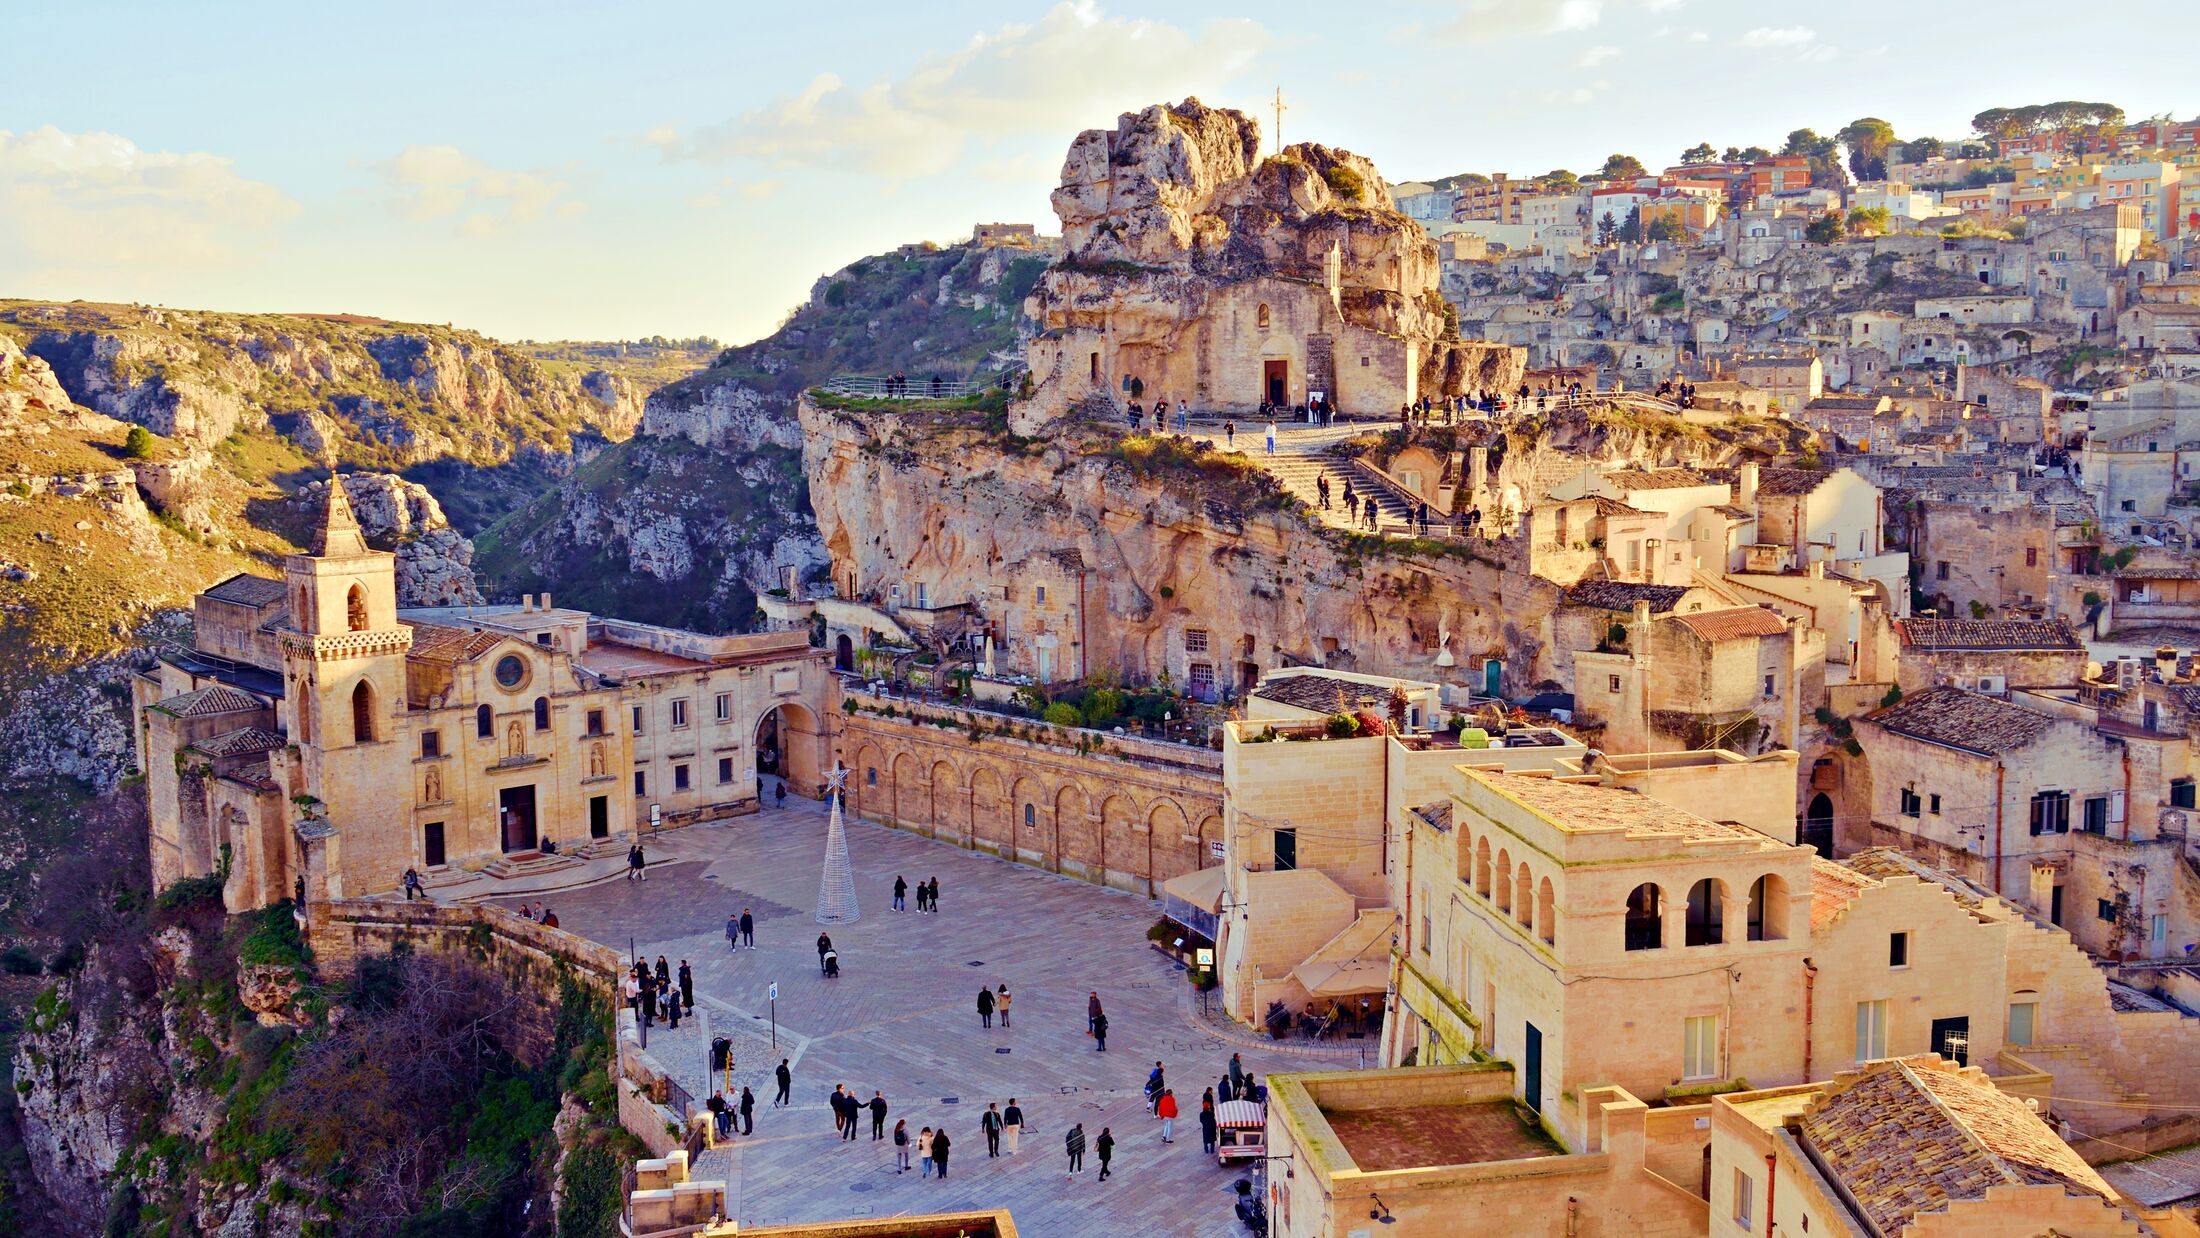 panorama of the famous Sassi di Matera carved into the rock in Basilicata, Italy